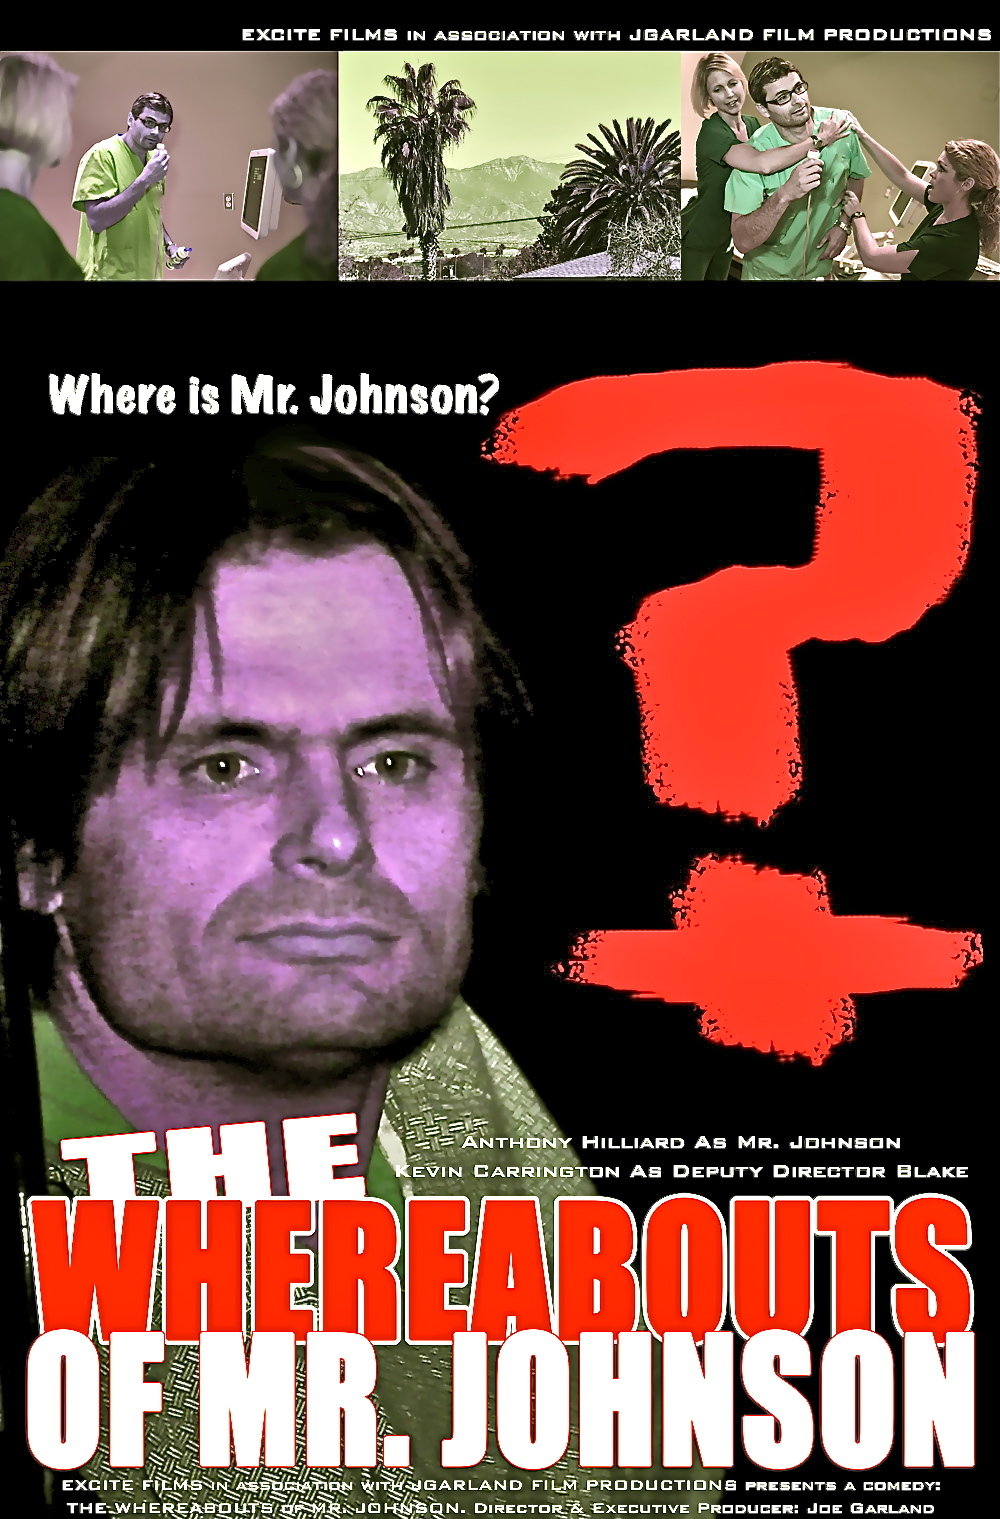 The Whereabouts of Mr. Johnson (a comedy)